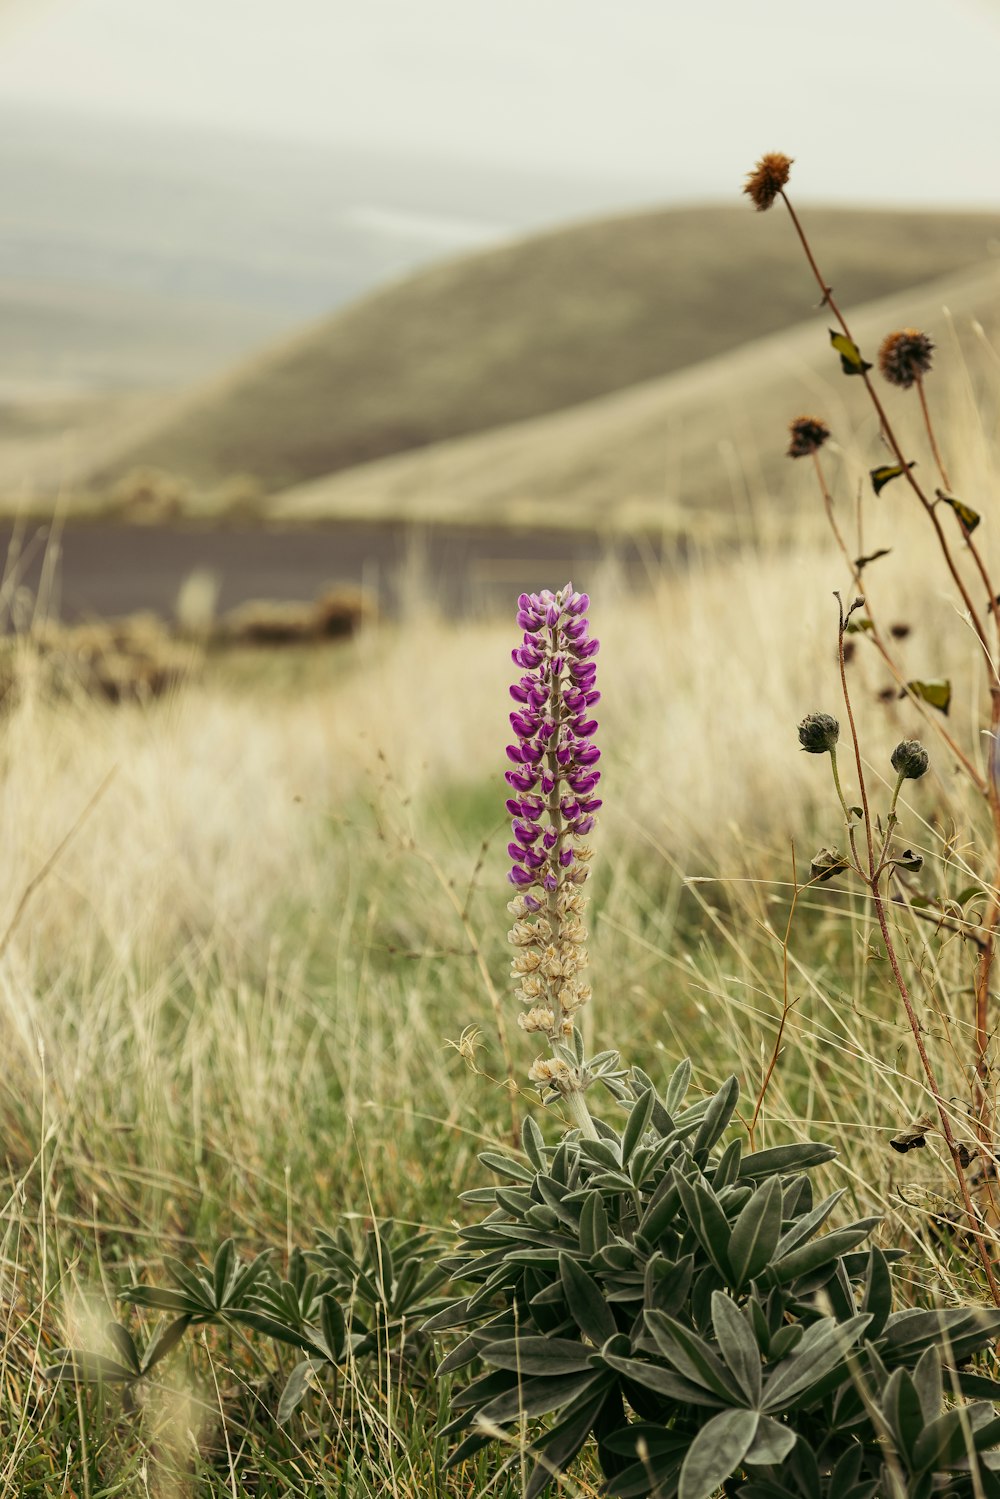 a purple flower in a grassy field with hills in the background